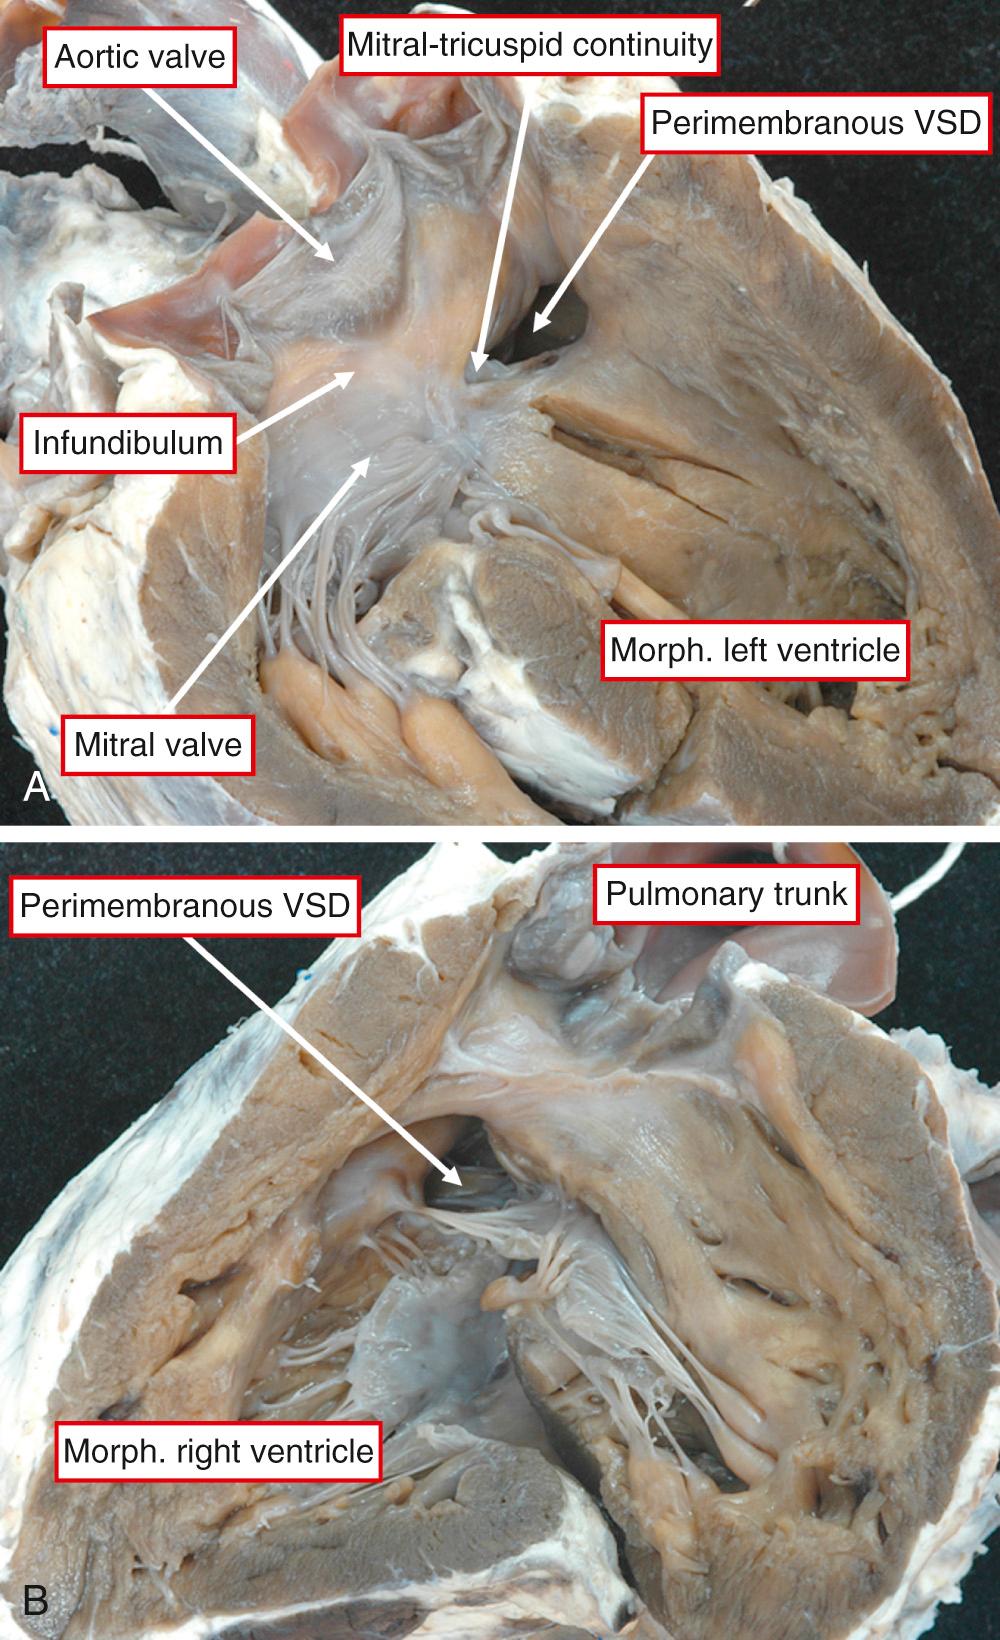 Fig. 38.14, Features of discordant atrioventricular connections combined with concordant ventriculoarterial connections. (A) Right-sided and (B) left-sided chambers. VSD, Ventricular septal defect.